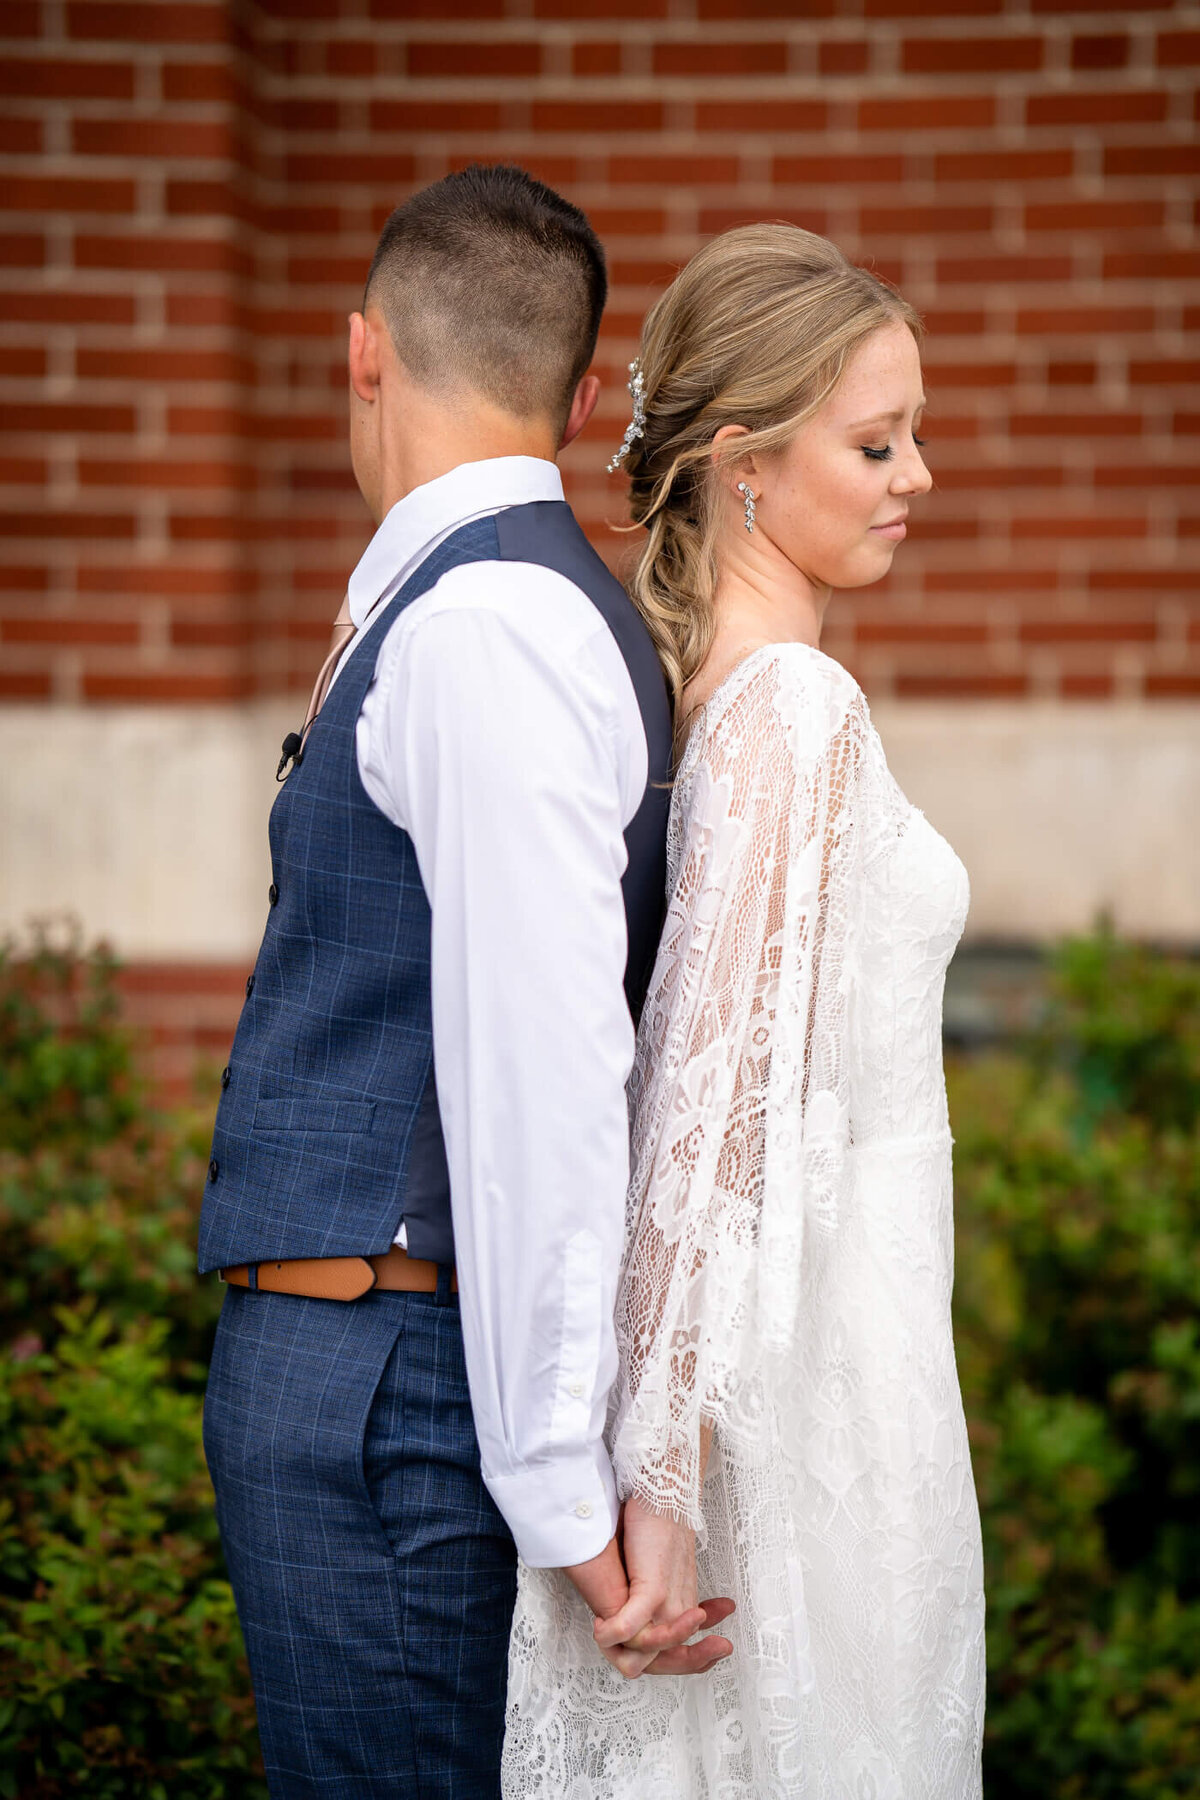 wedding photos of bride and groom stand back to back and hold hands during their first look and vowel reading at their local church.